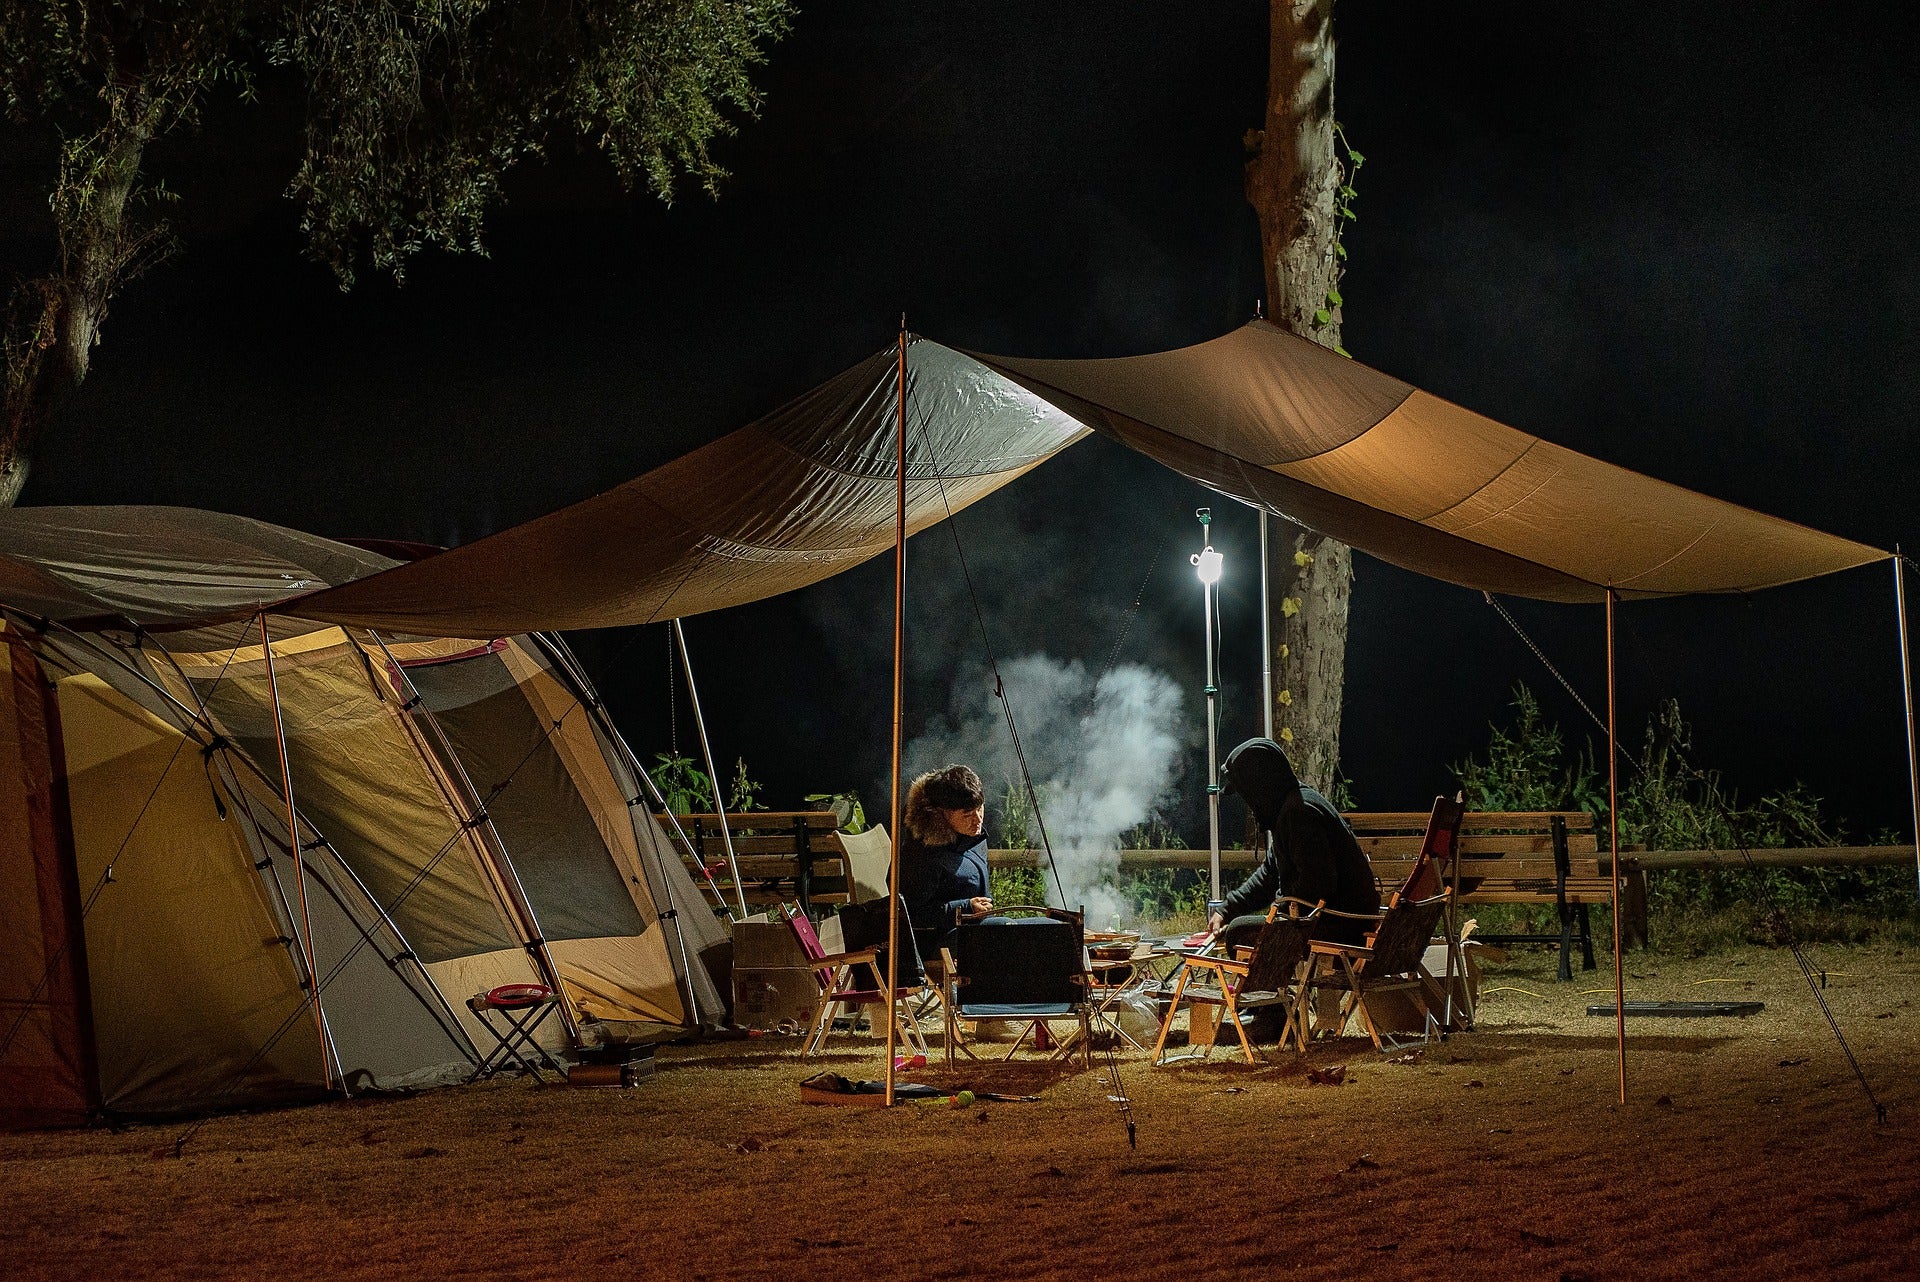 11 Items That Will Change The Way You Camp